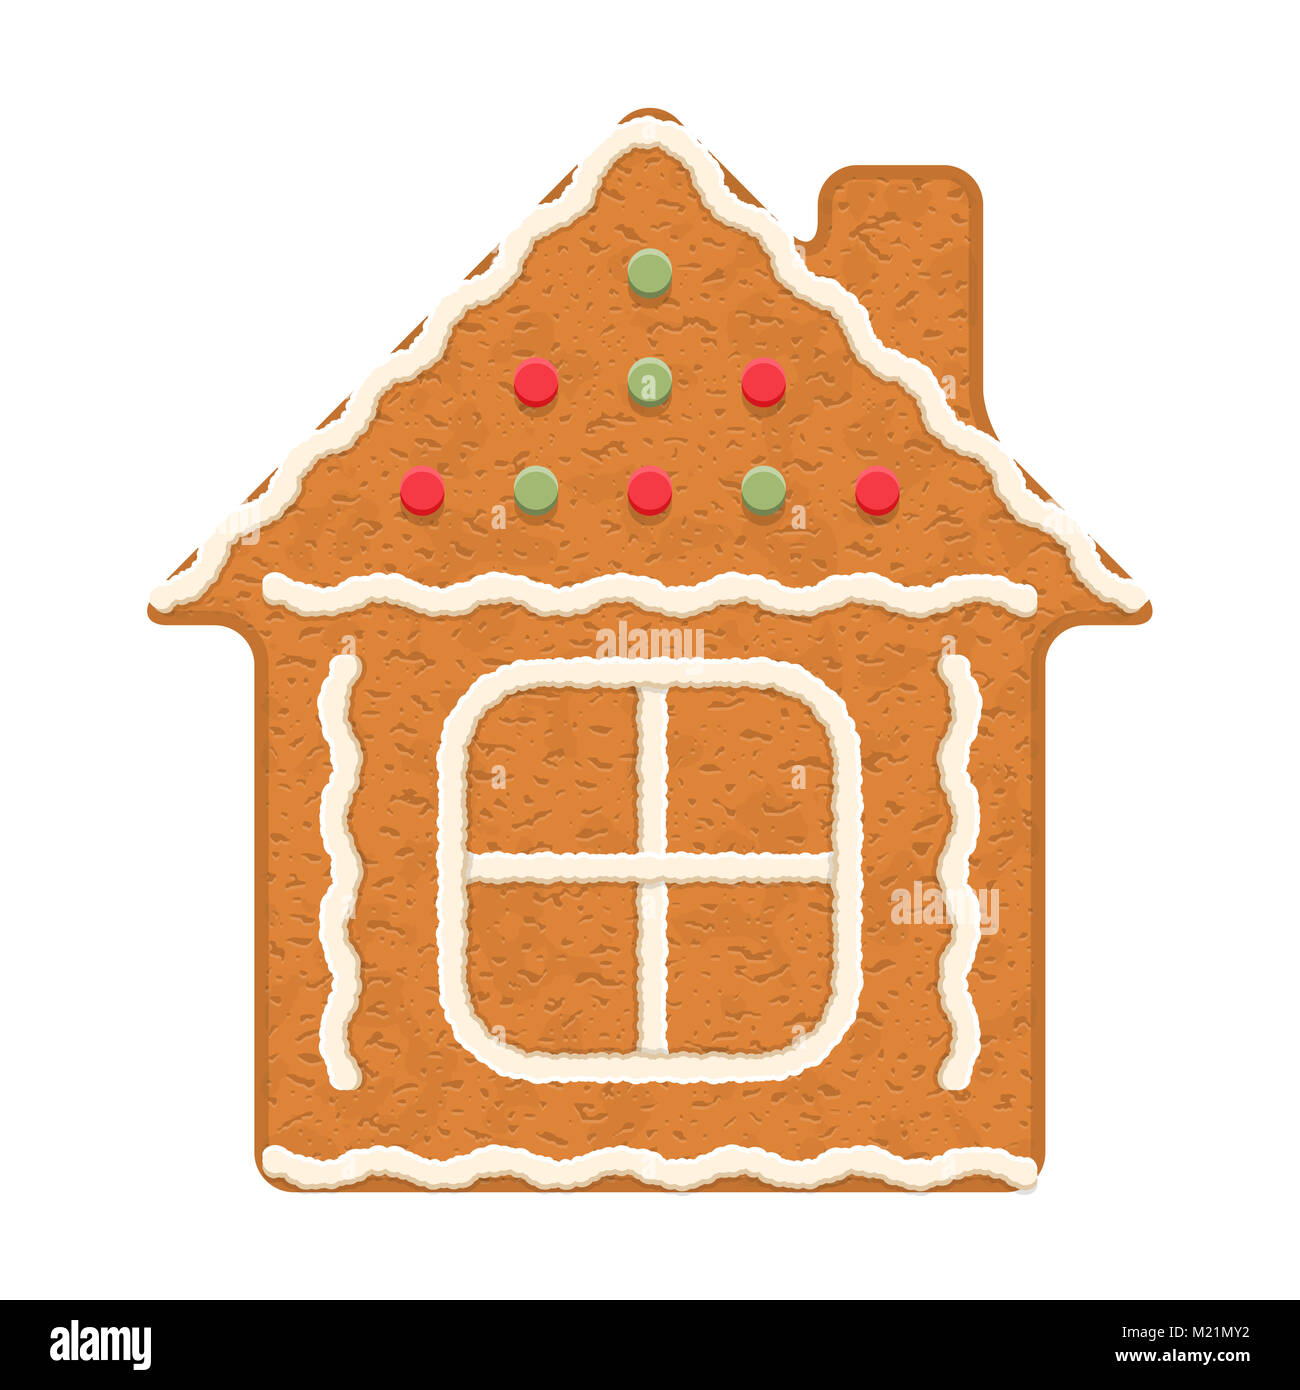 Gingerbread house, traditional Christmas cookie, vector eps10 illustration Stock Photo